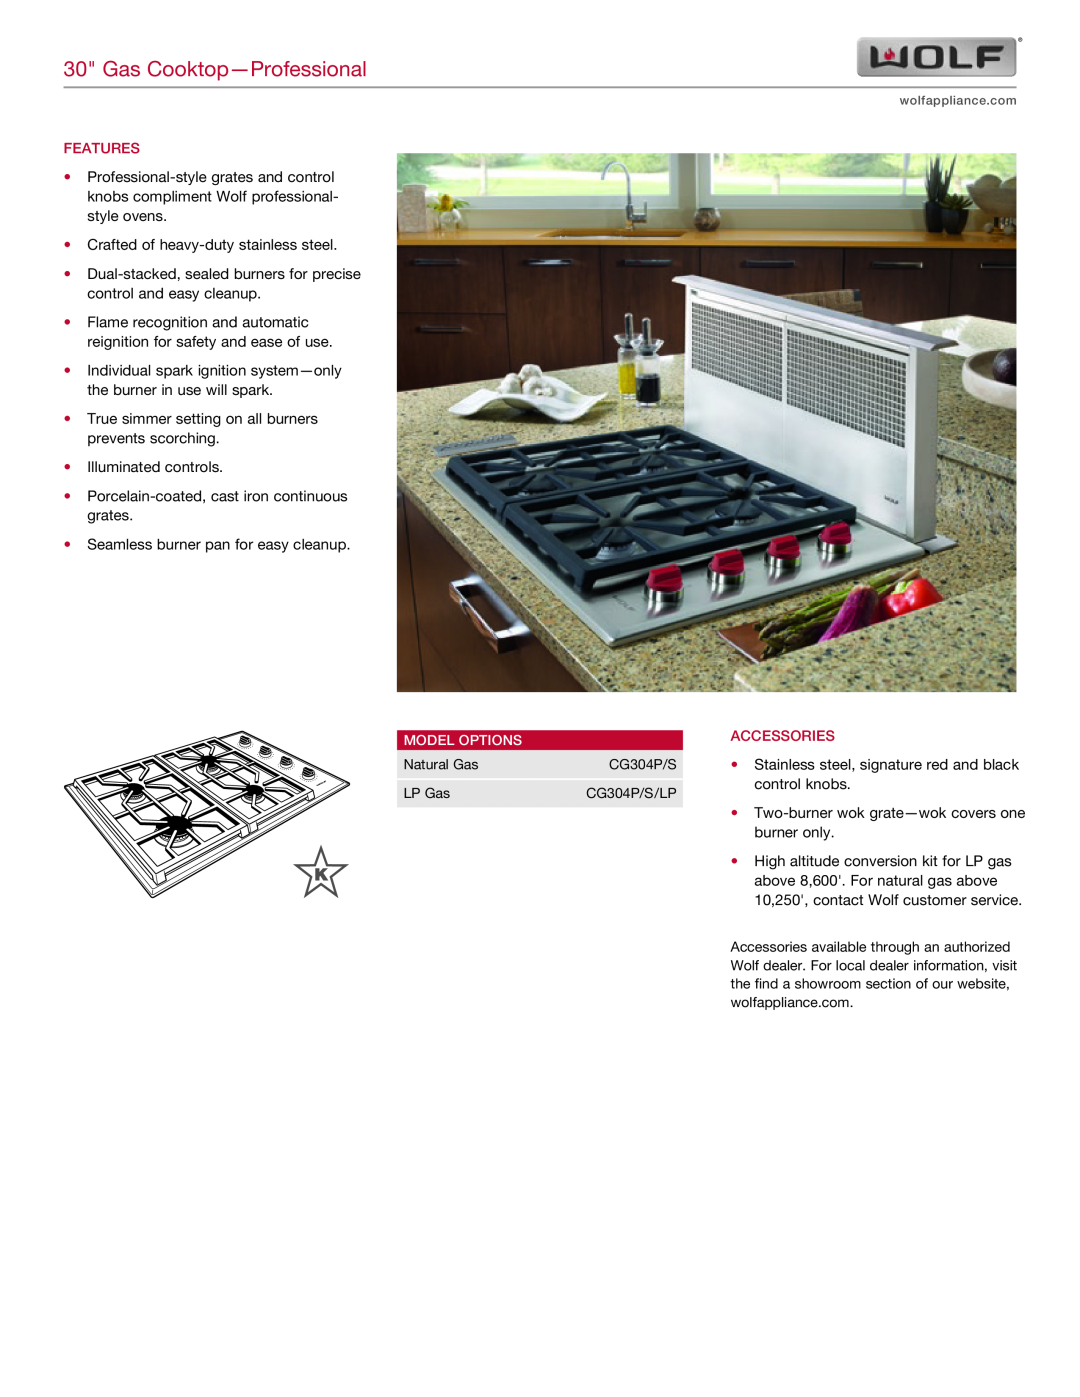 Wolf Appliance Company CG304P/S/LP manual Gas Cooktop-Professional, Features, Model Options, Accessories 